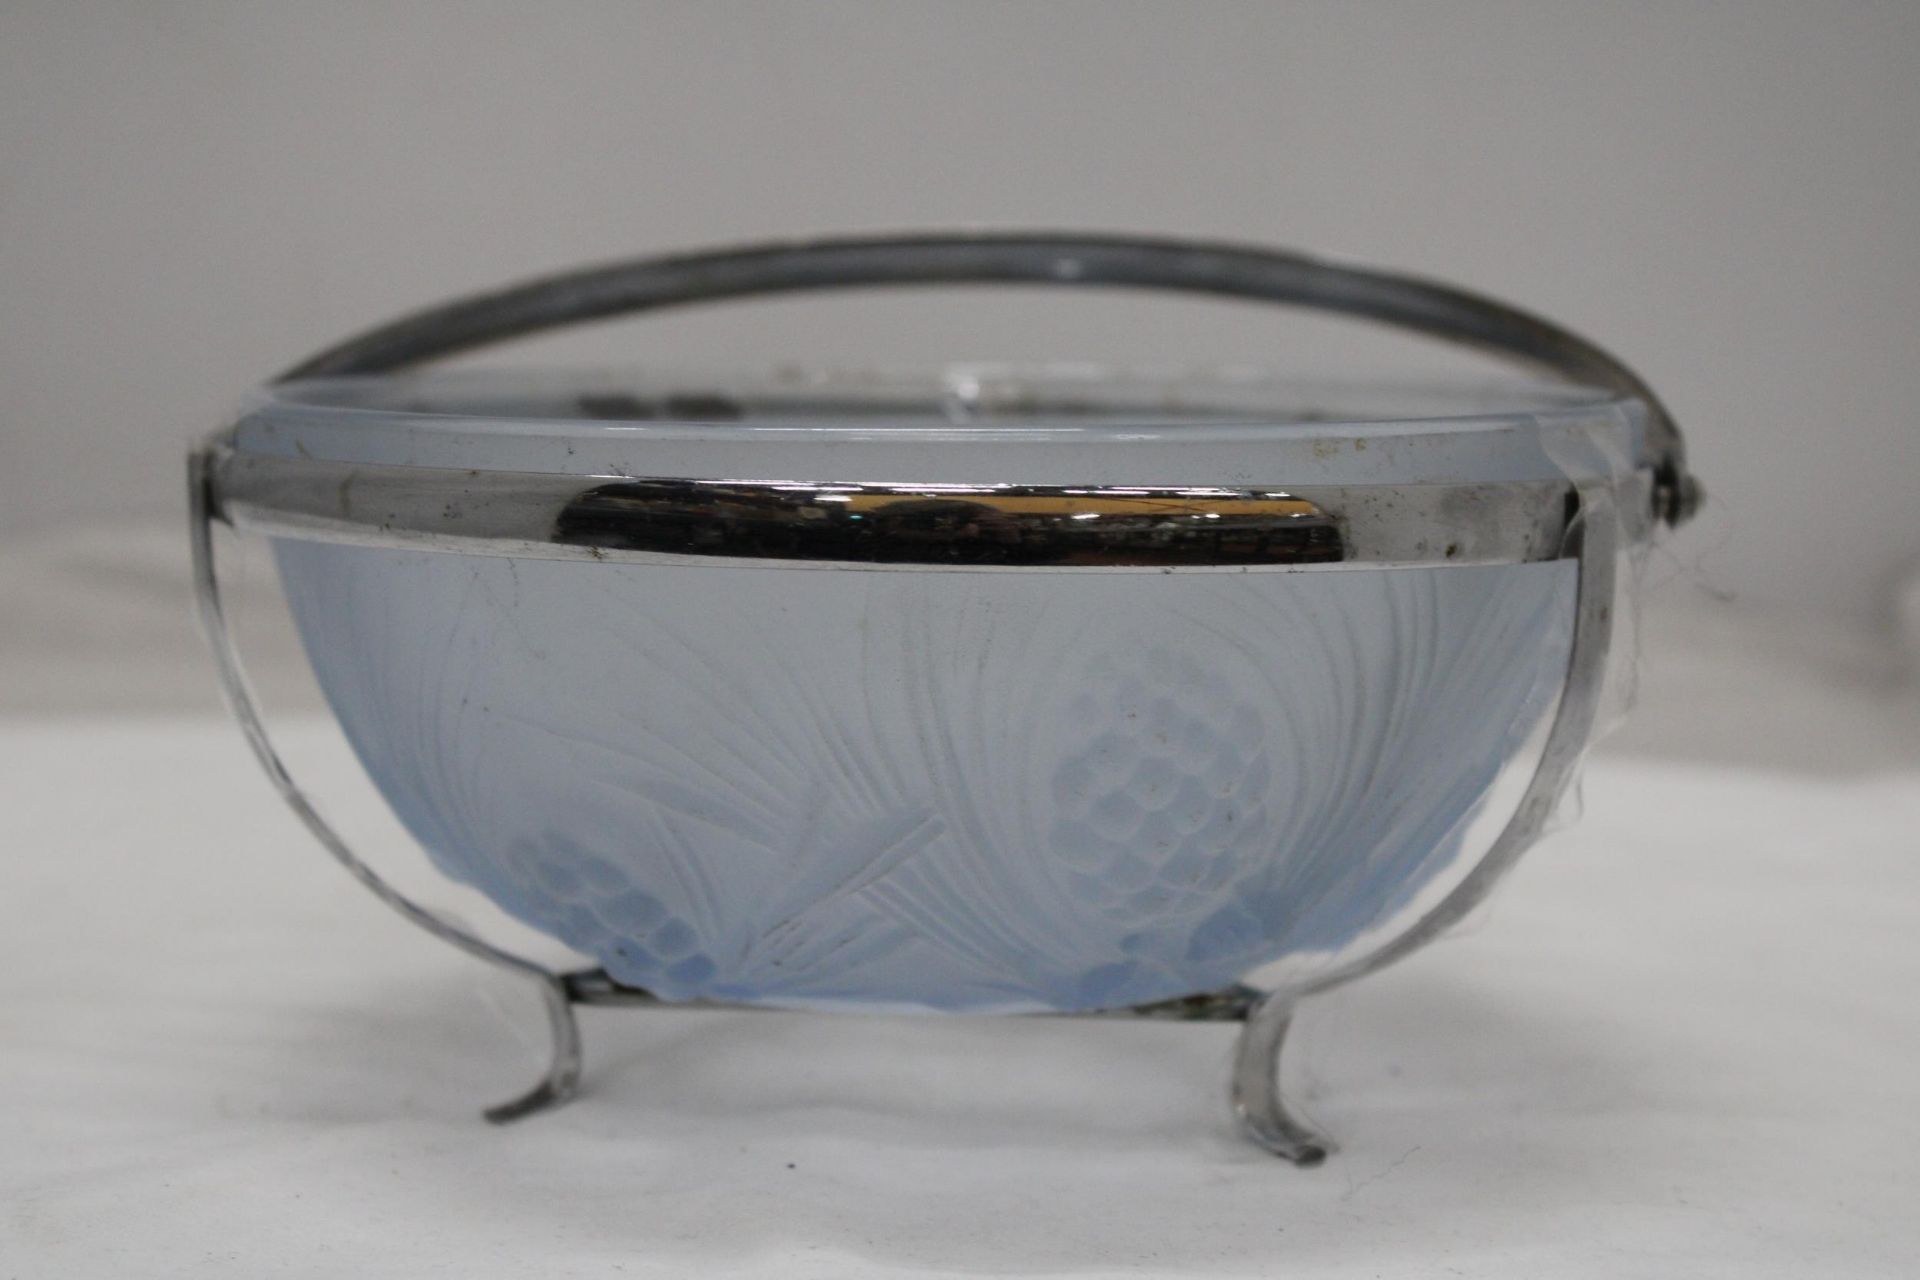 A VINTAGE JOBLING GLASS BOWL IN A SILVER PLATED HOLDER, DIAMETER 18CM - Image 2 of 6